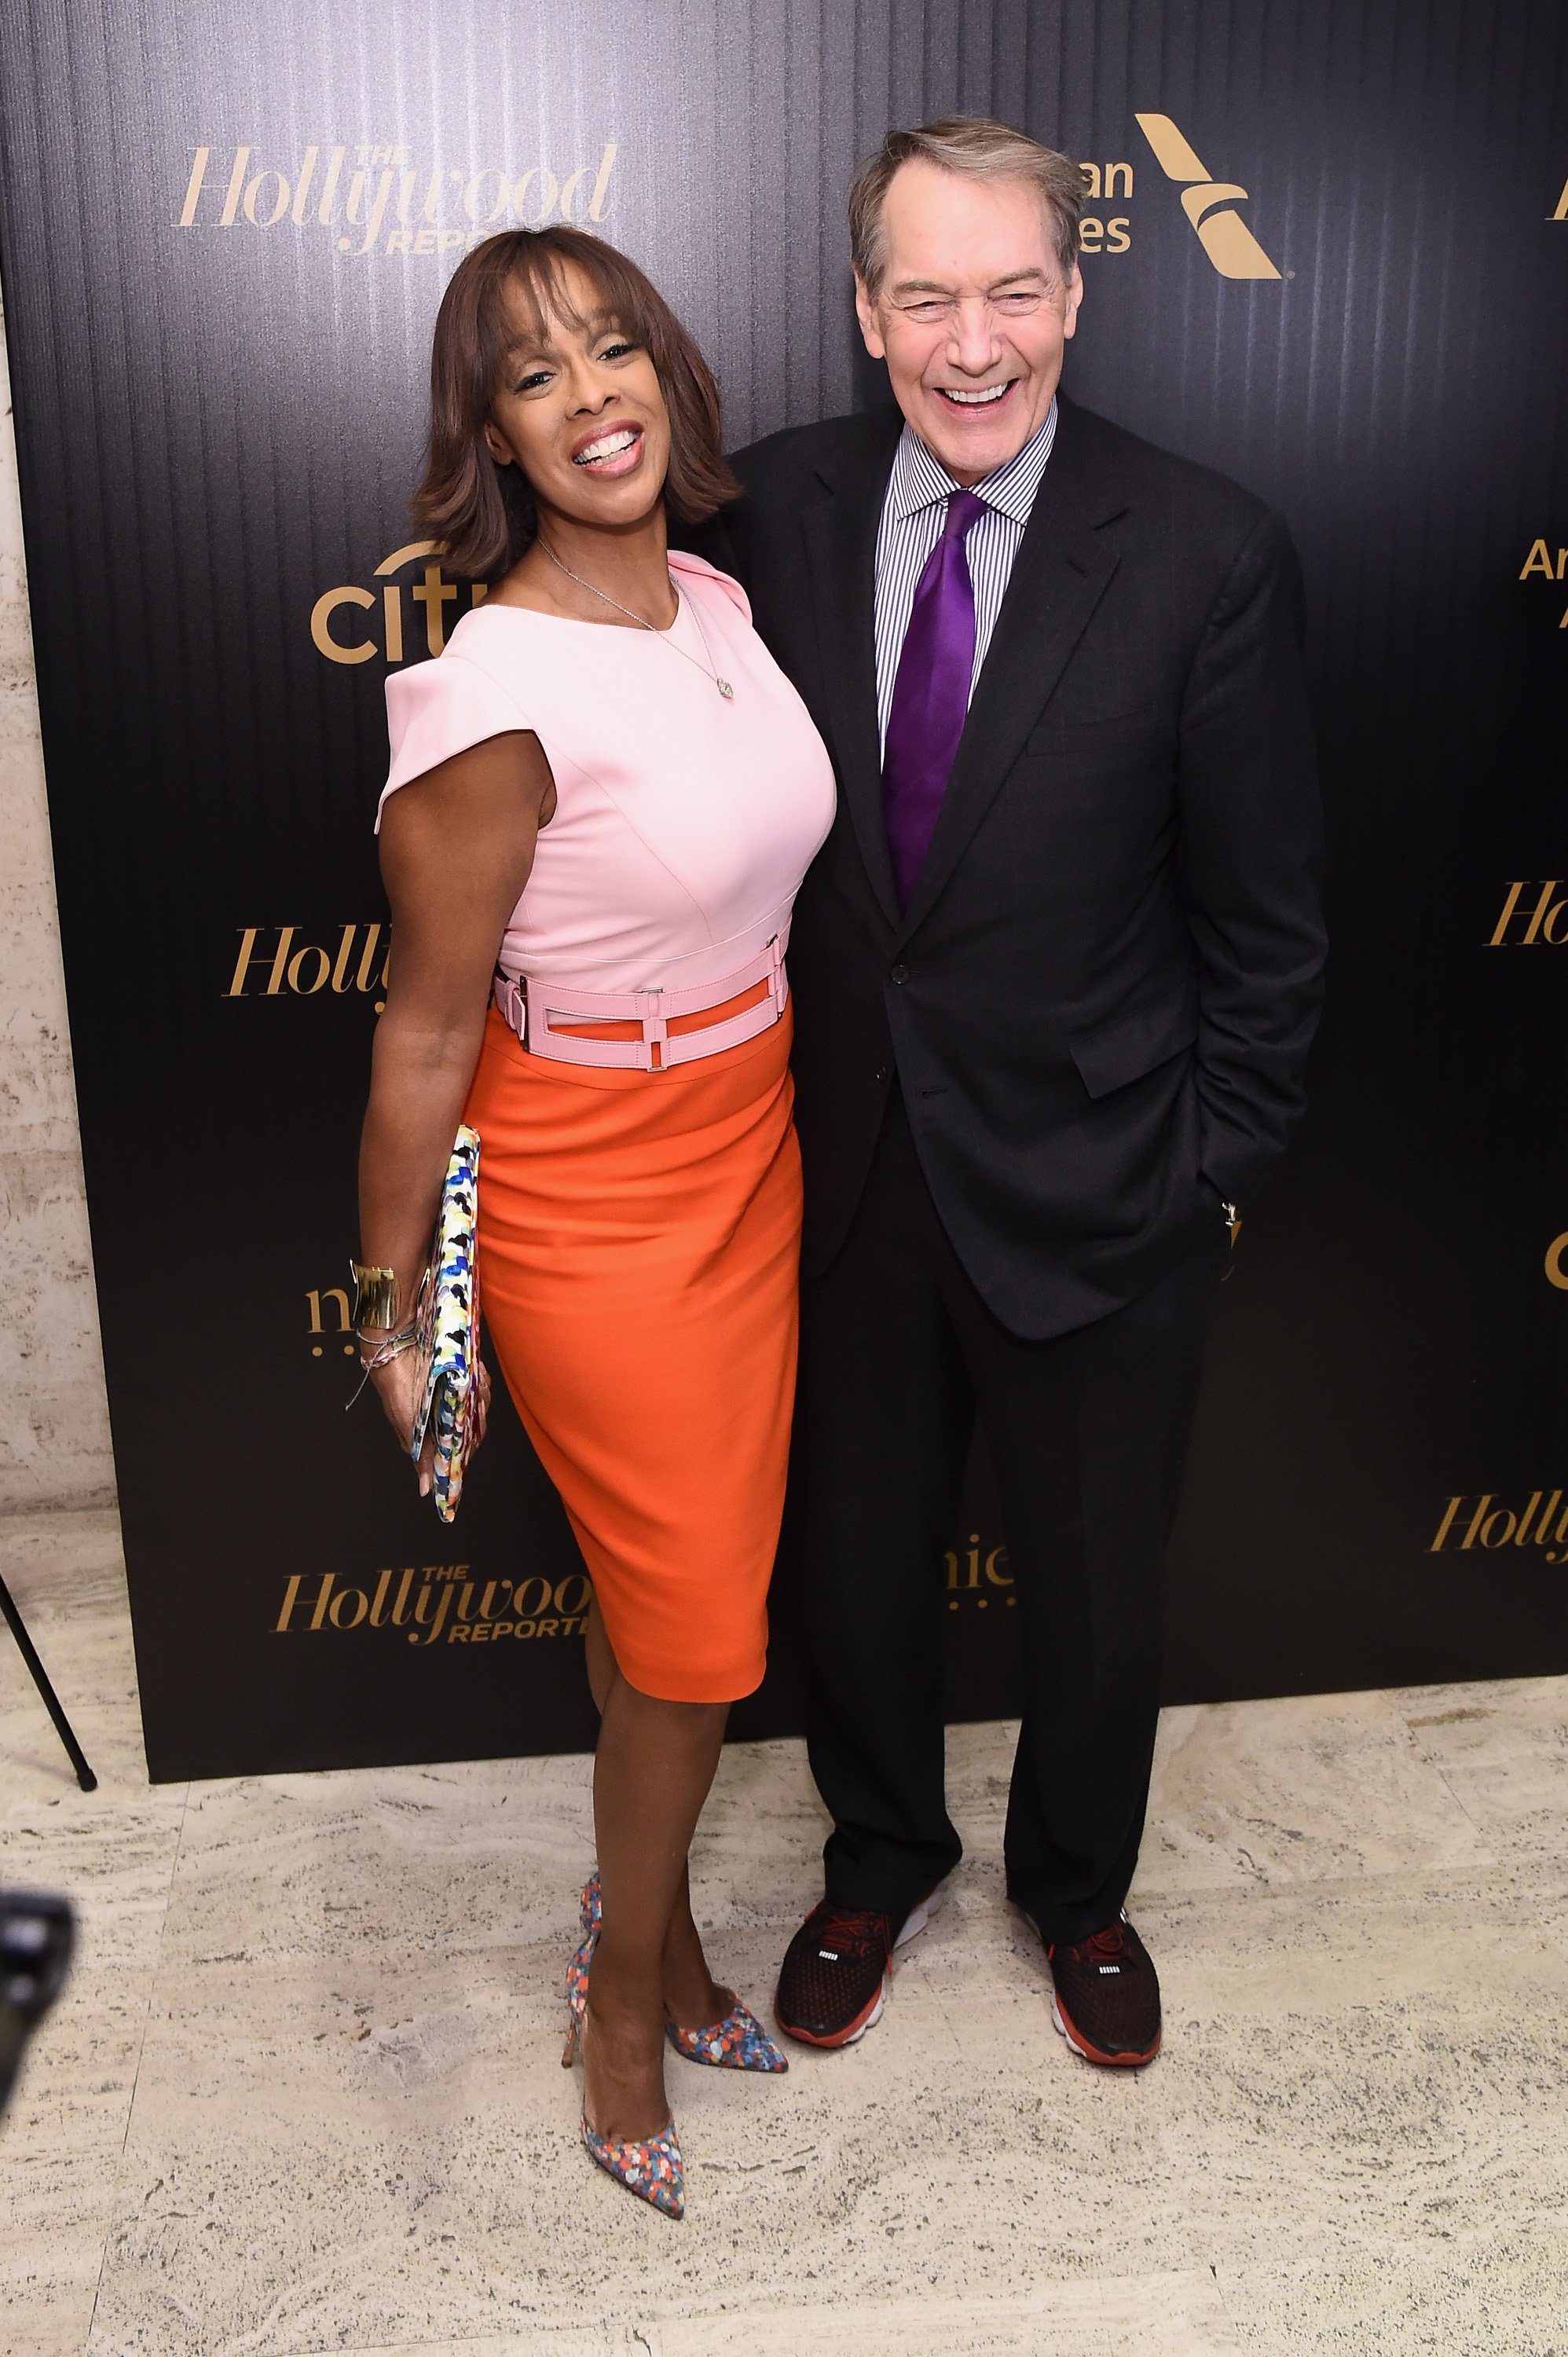 Gayle King and Charlie Rose attend the Hollywood Reporter's 2016 35 Most Powerful People in Media at Four Seasons Restaurant on April 6, 2016. | Photo: GettyImages